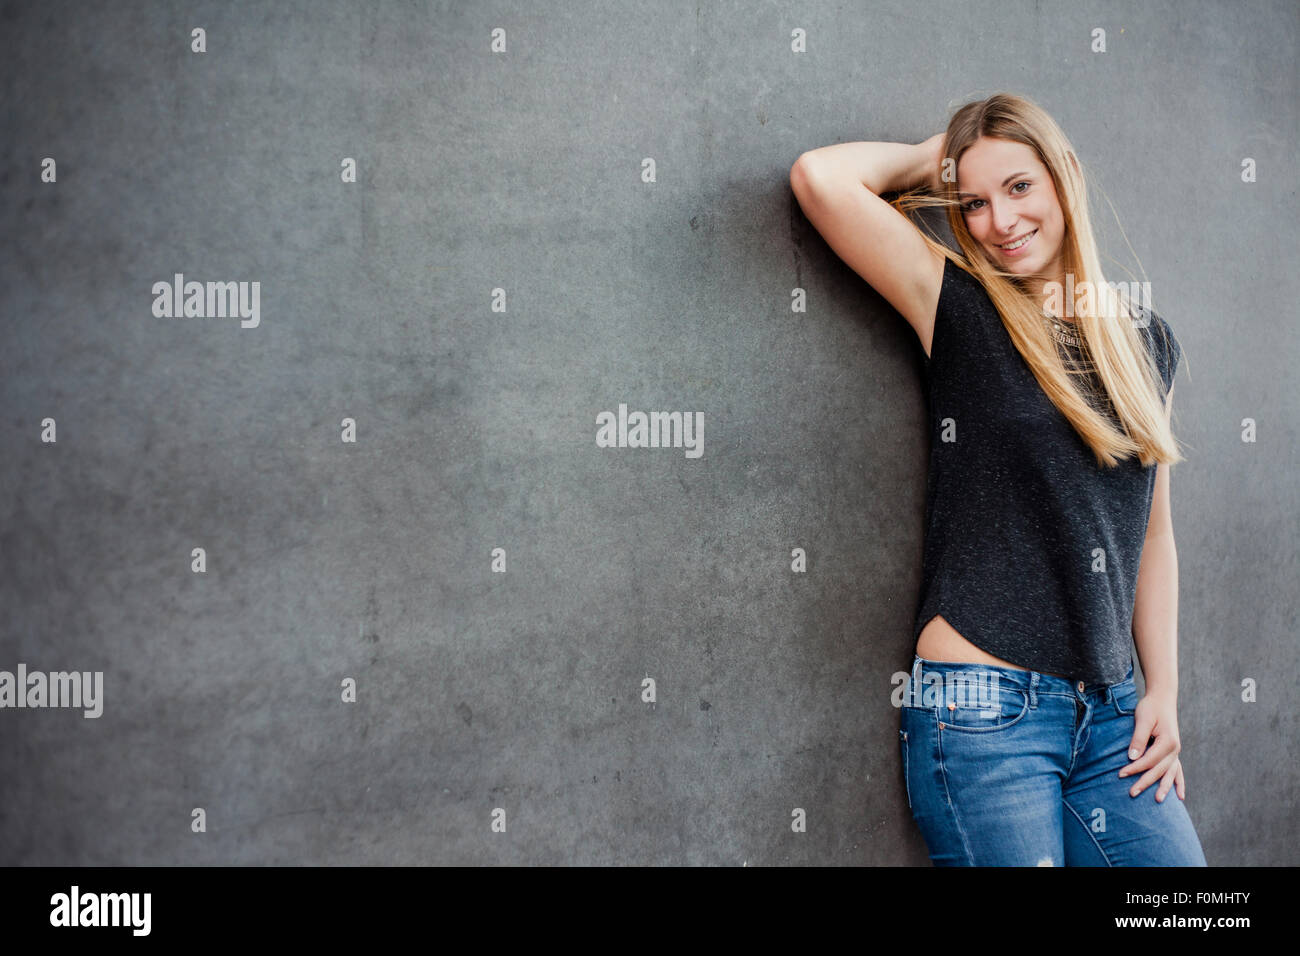 Attractive teenage girl in front of concrete wall Stock Photo